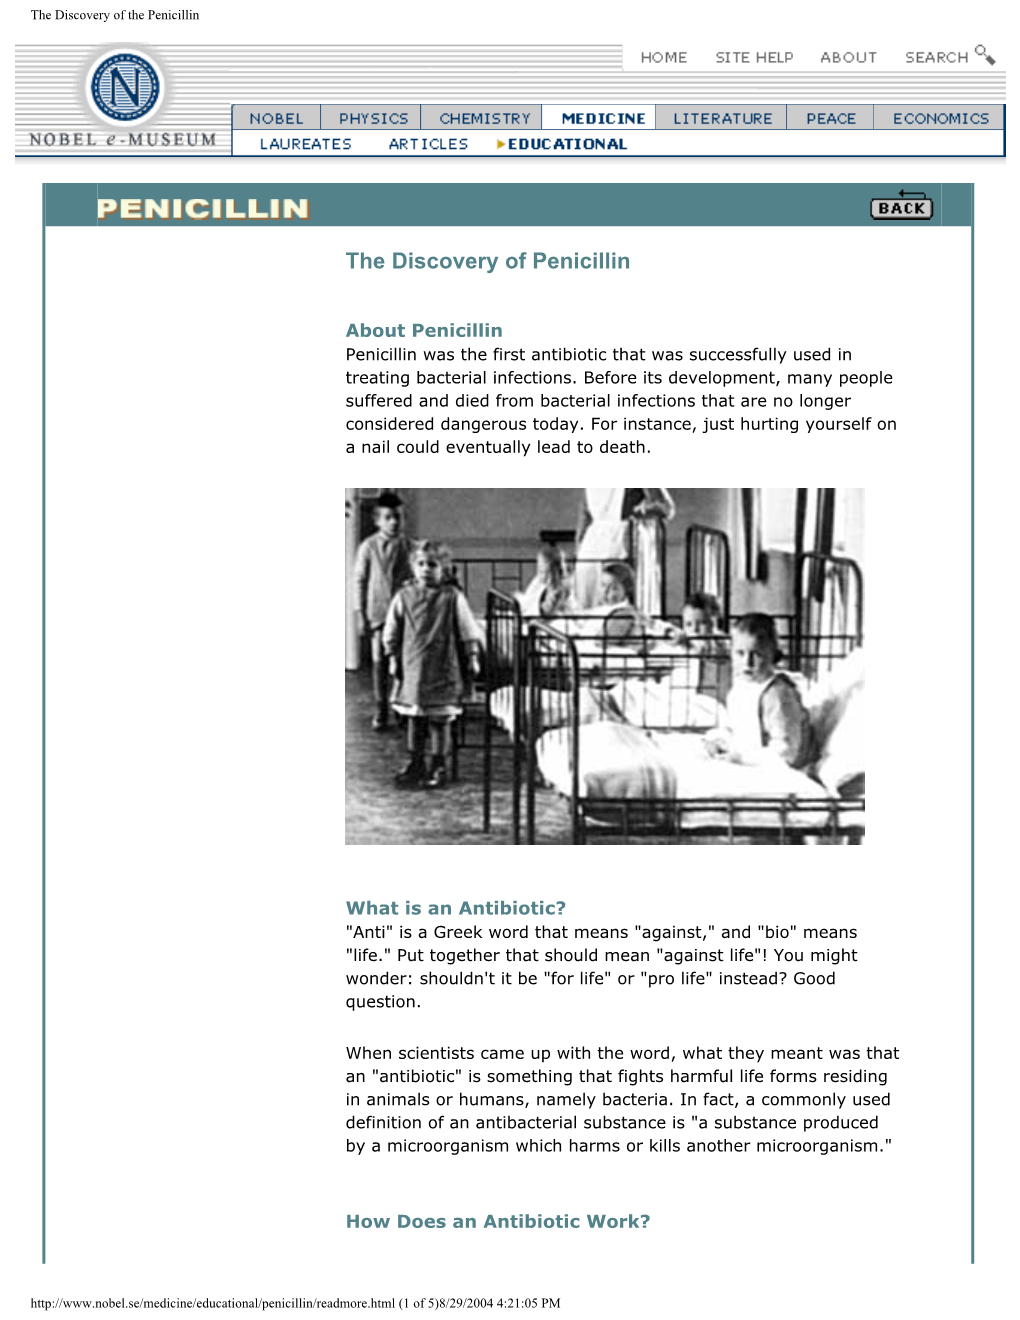 The Discovery of the Penicillin.Pdf